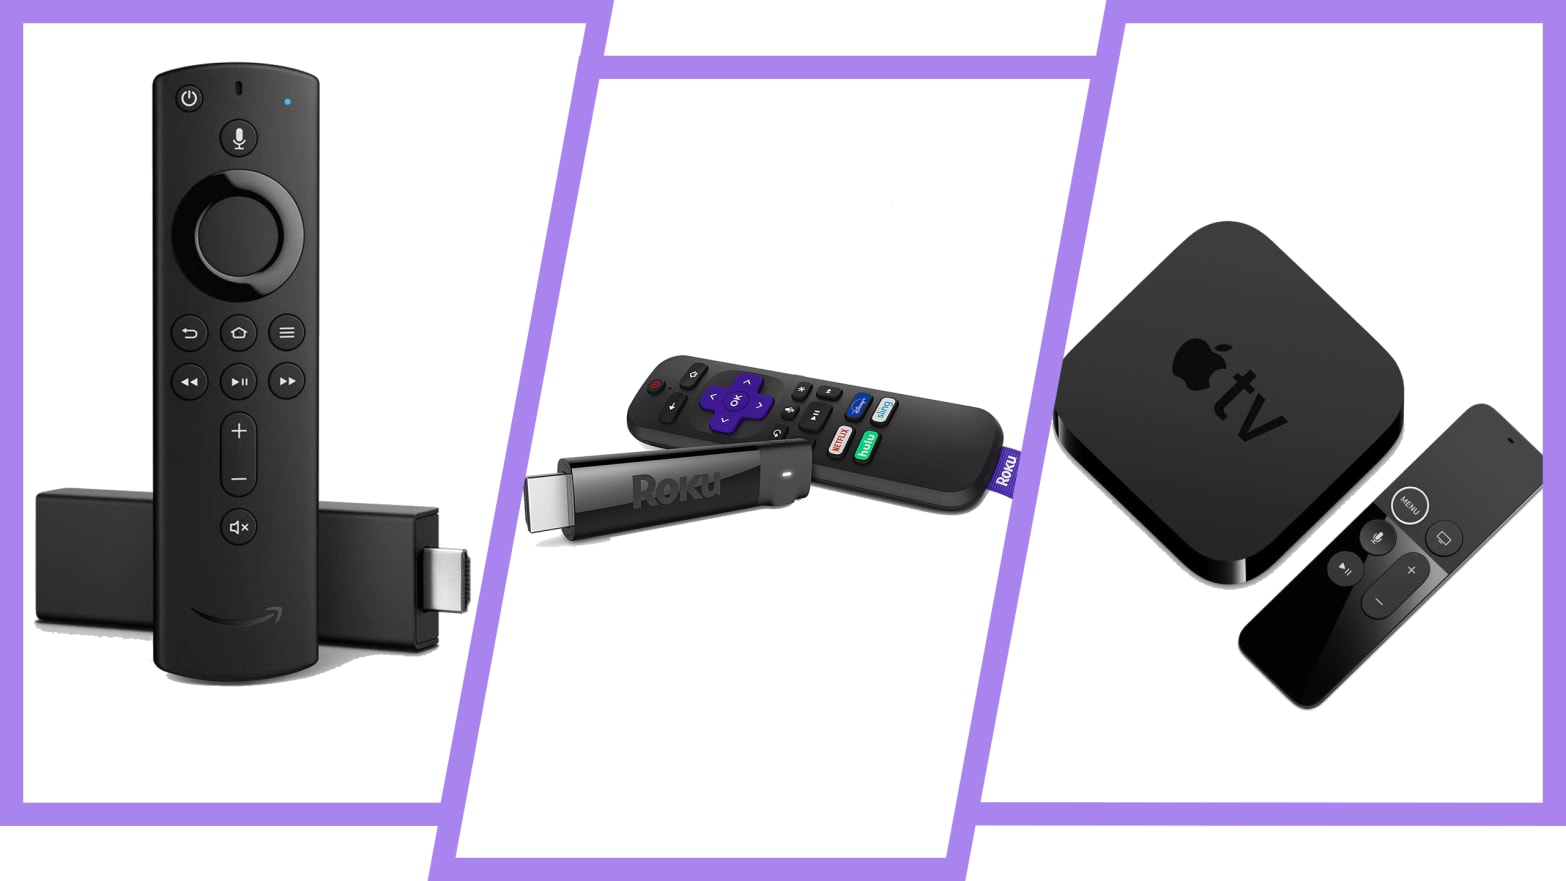 Difference Between Roku, Fire Stick, and Apple TV